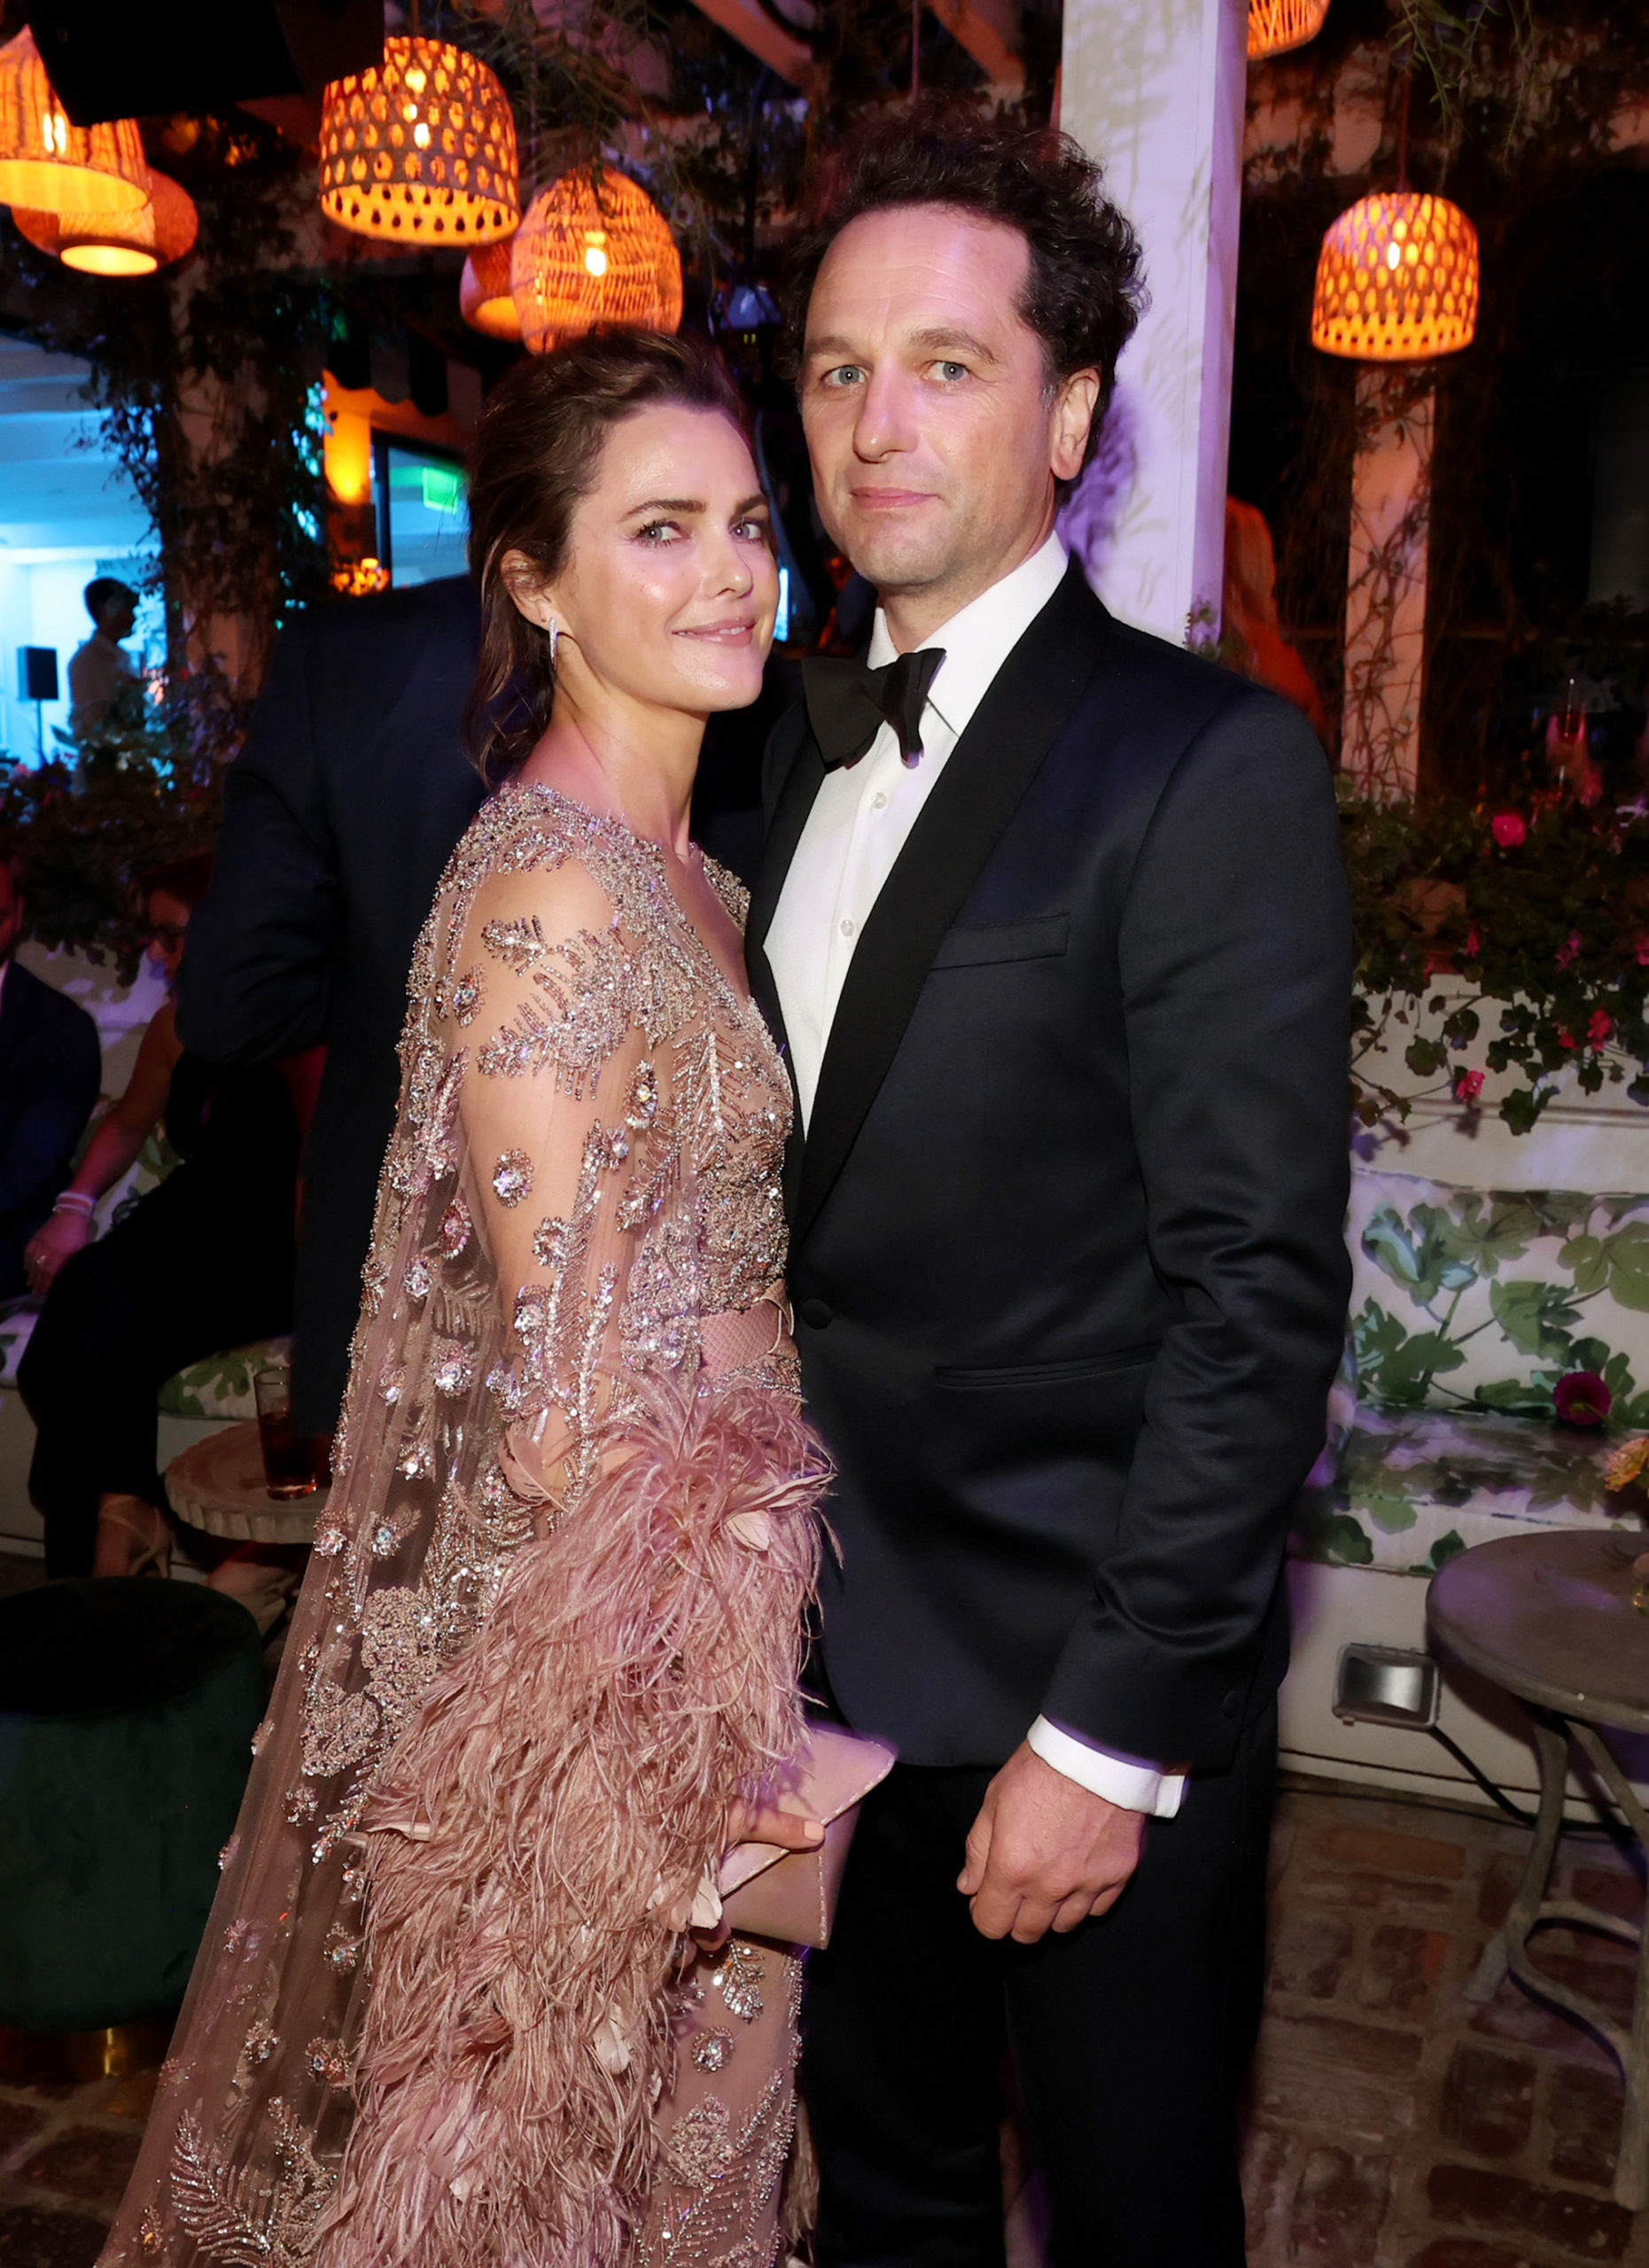 Keri Russell and Matthew Rhys at the HBO/ HBO Max Post Emmys Reception